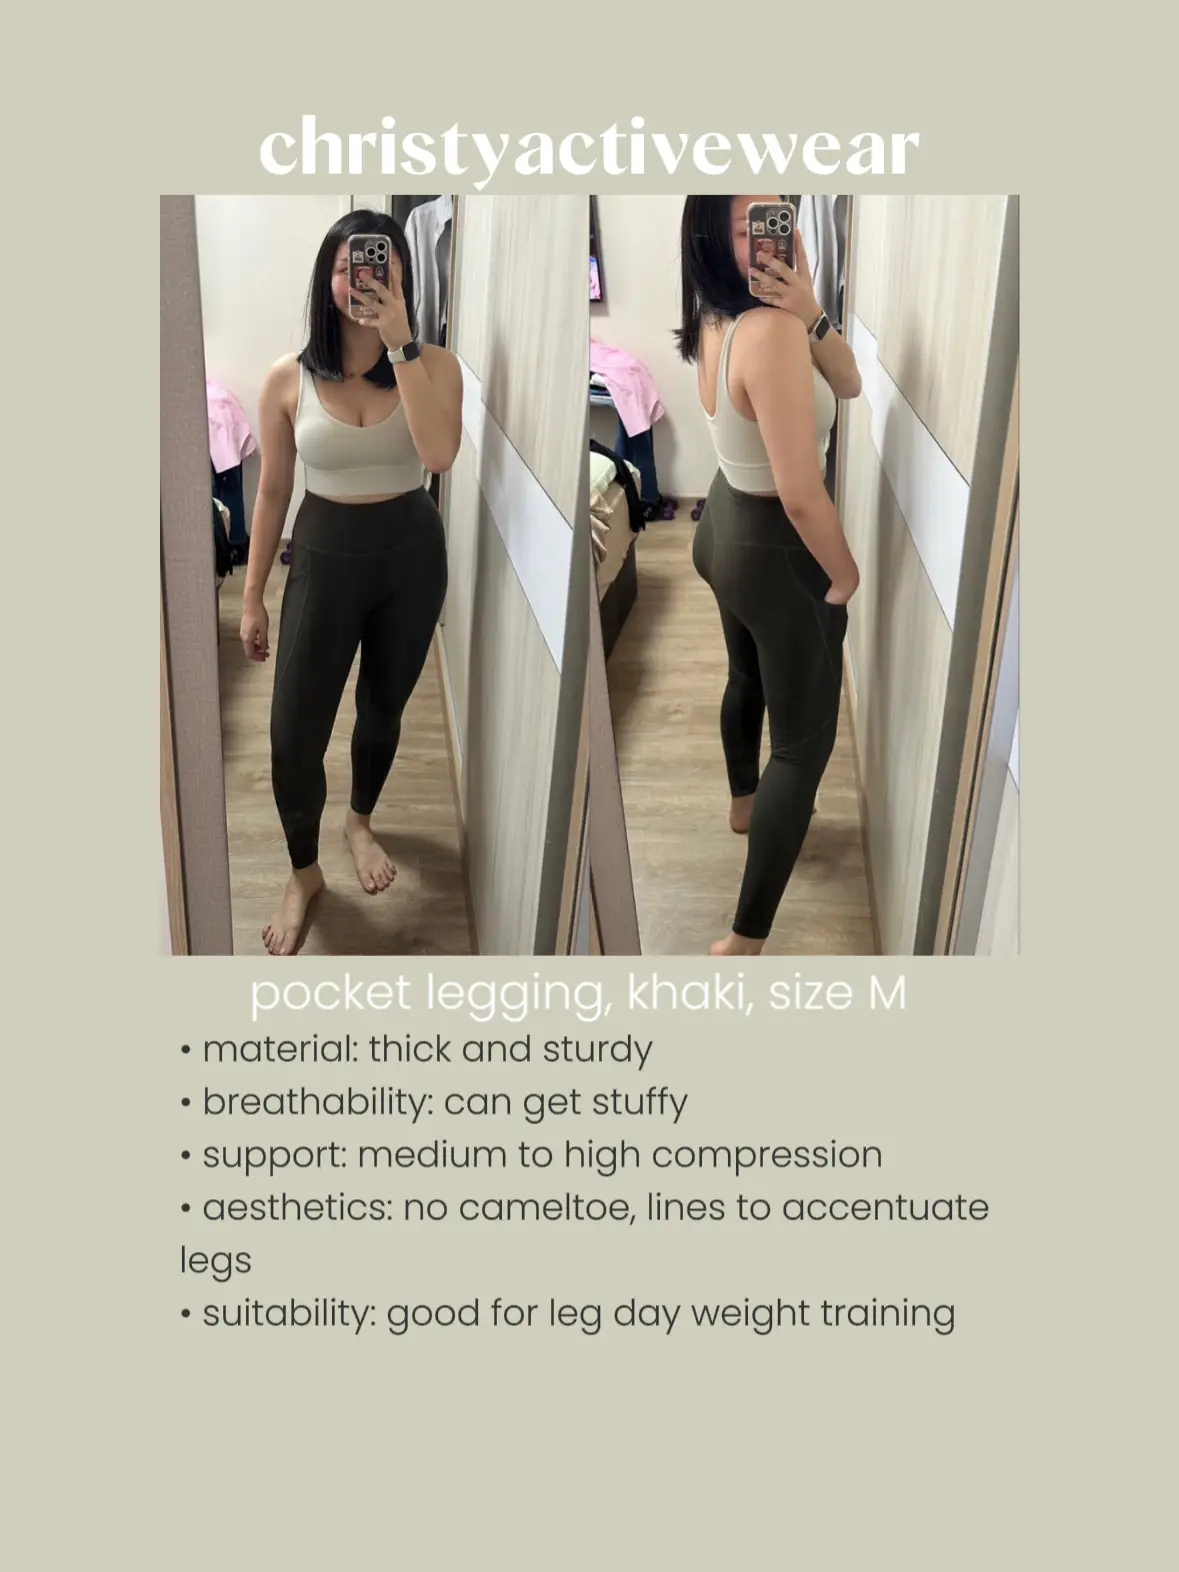 rating 4 leggings from 4 different brands~